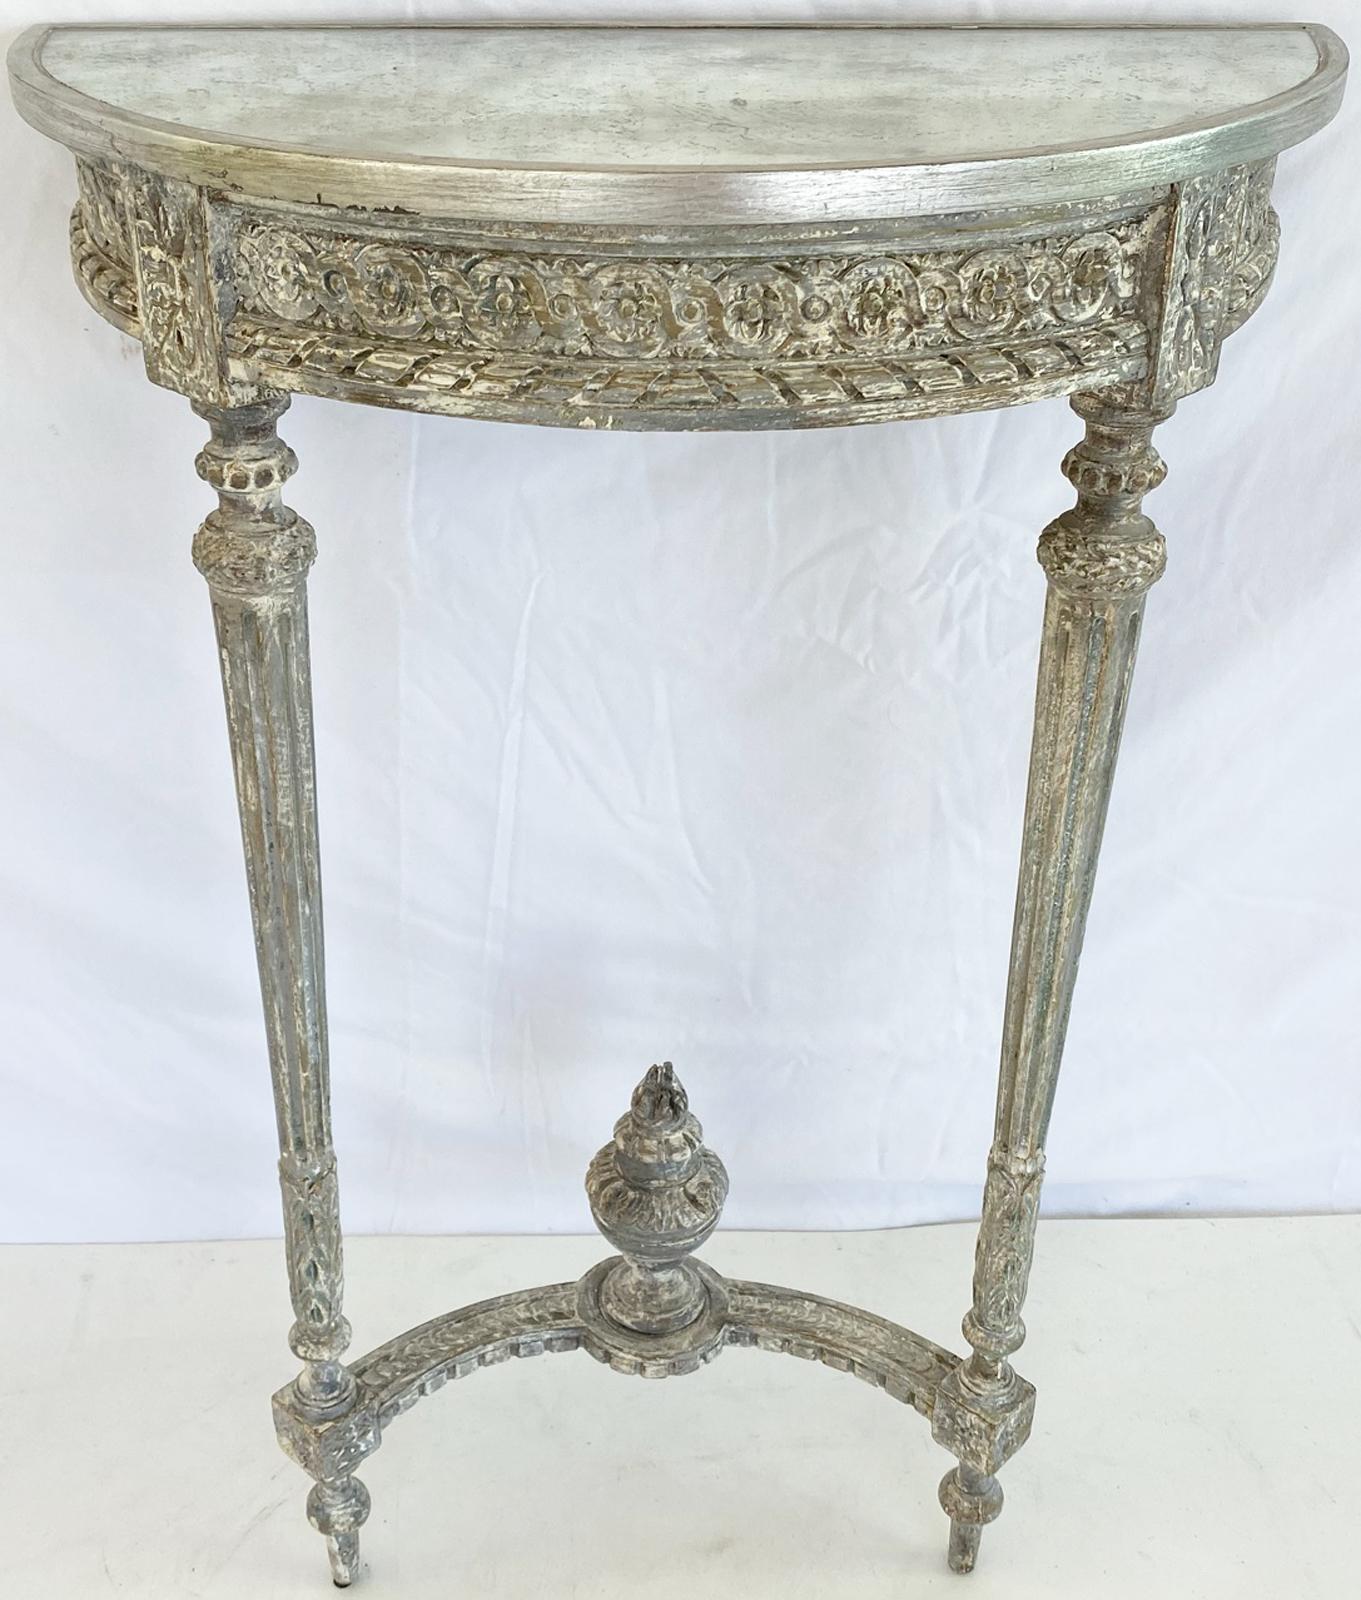 Pair of Louis XVI style, painted and parcel silvergilt demilune wall-mounting consoles, each top of mirrorplate on antique table base with fielded apron, out-carved with evolute scroll and gadrooing, raised on two round, fluted, tapering legs,